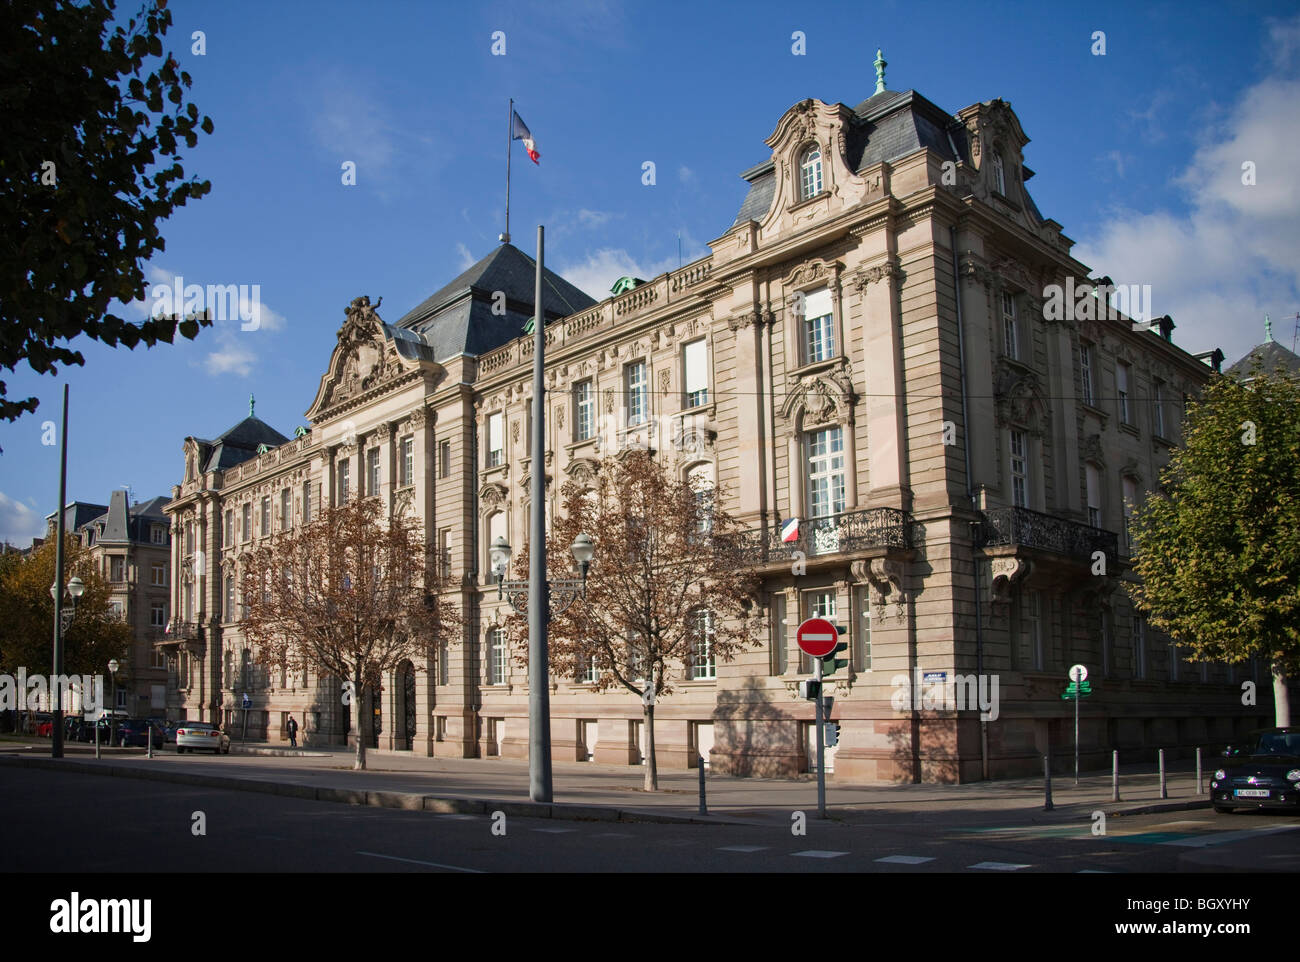 official government building Museum palais in strasbourg Alsace france  Horizontal building 099942 Strasbourg Stock Photo - Alamy